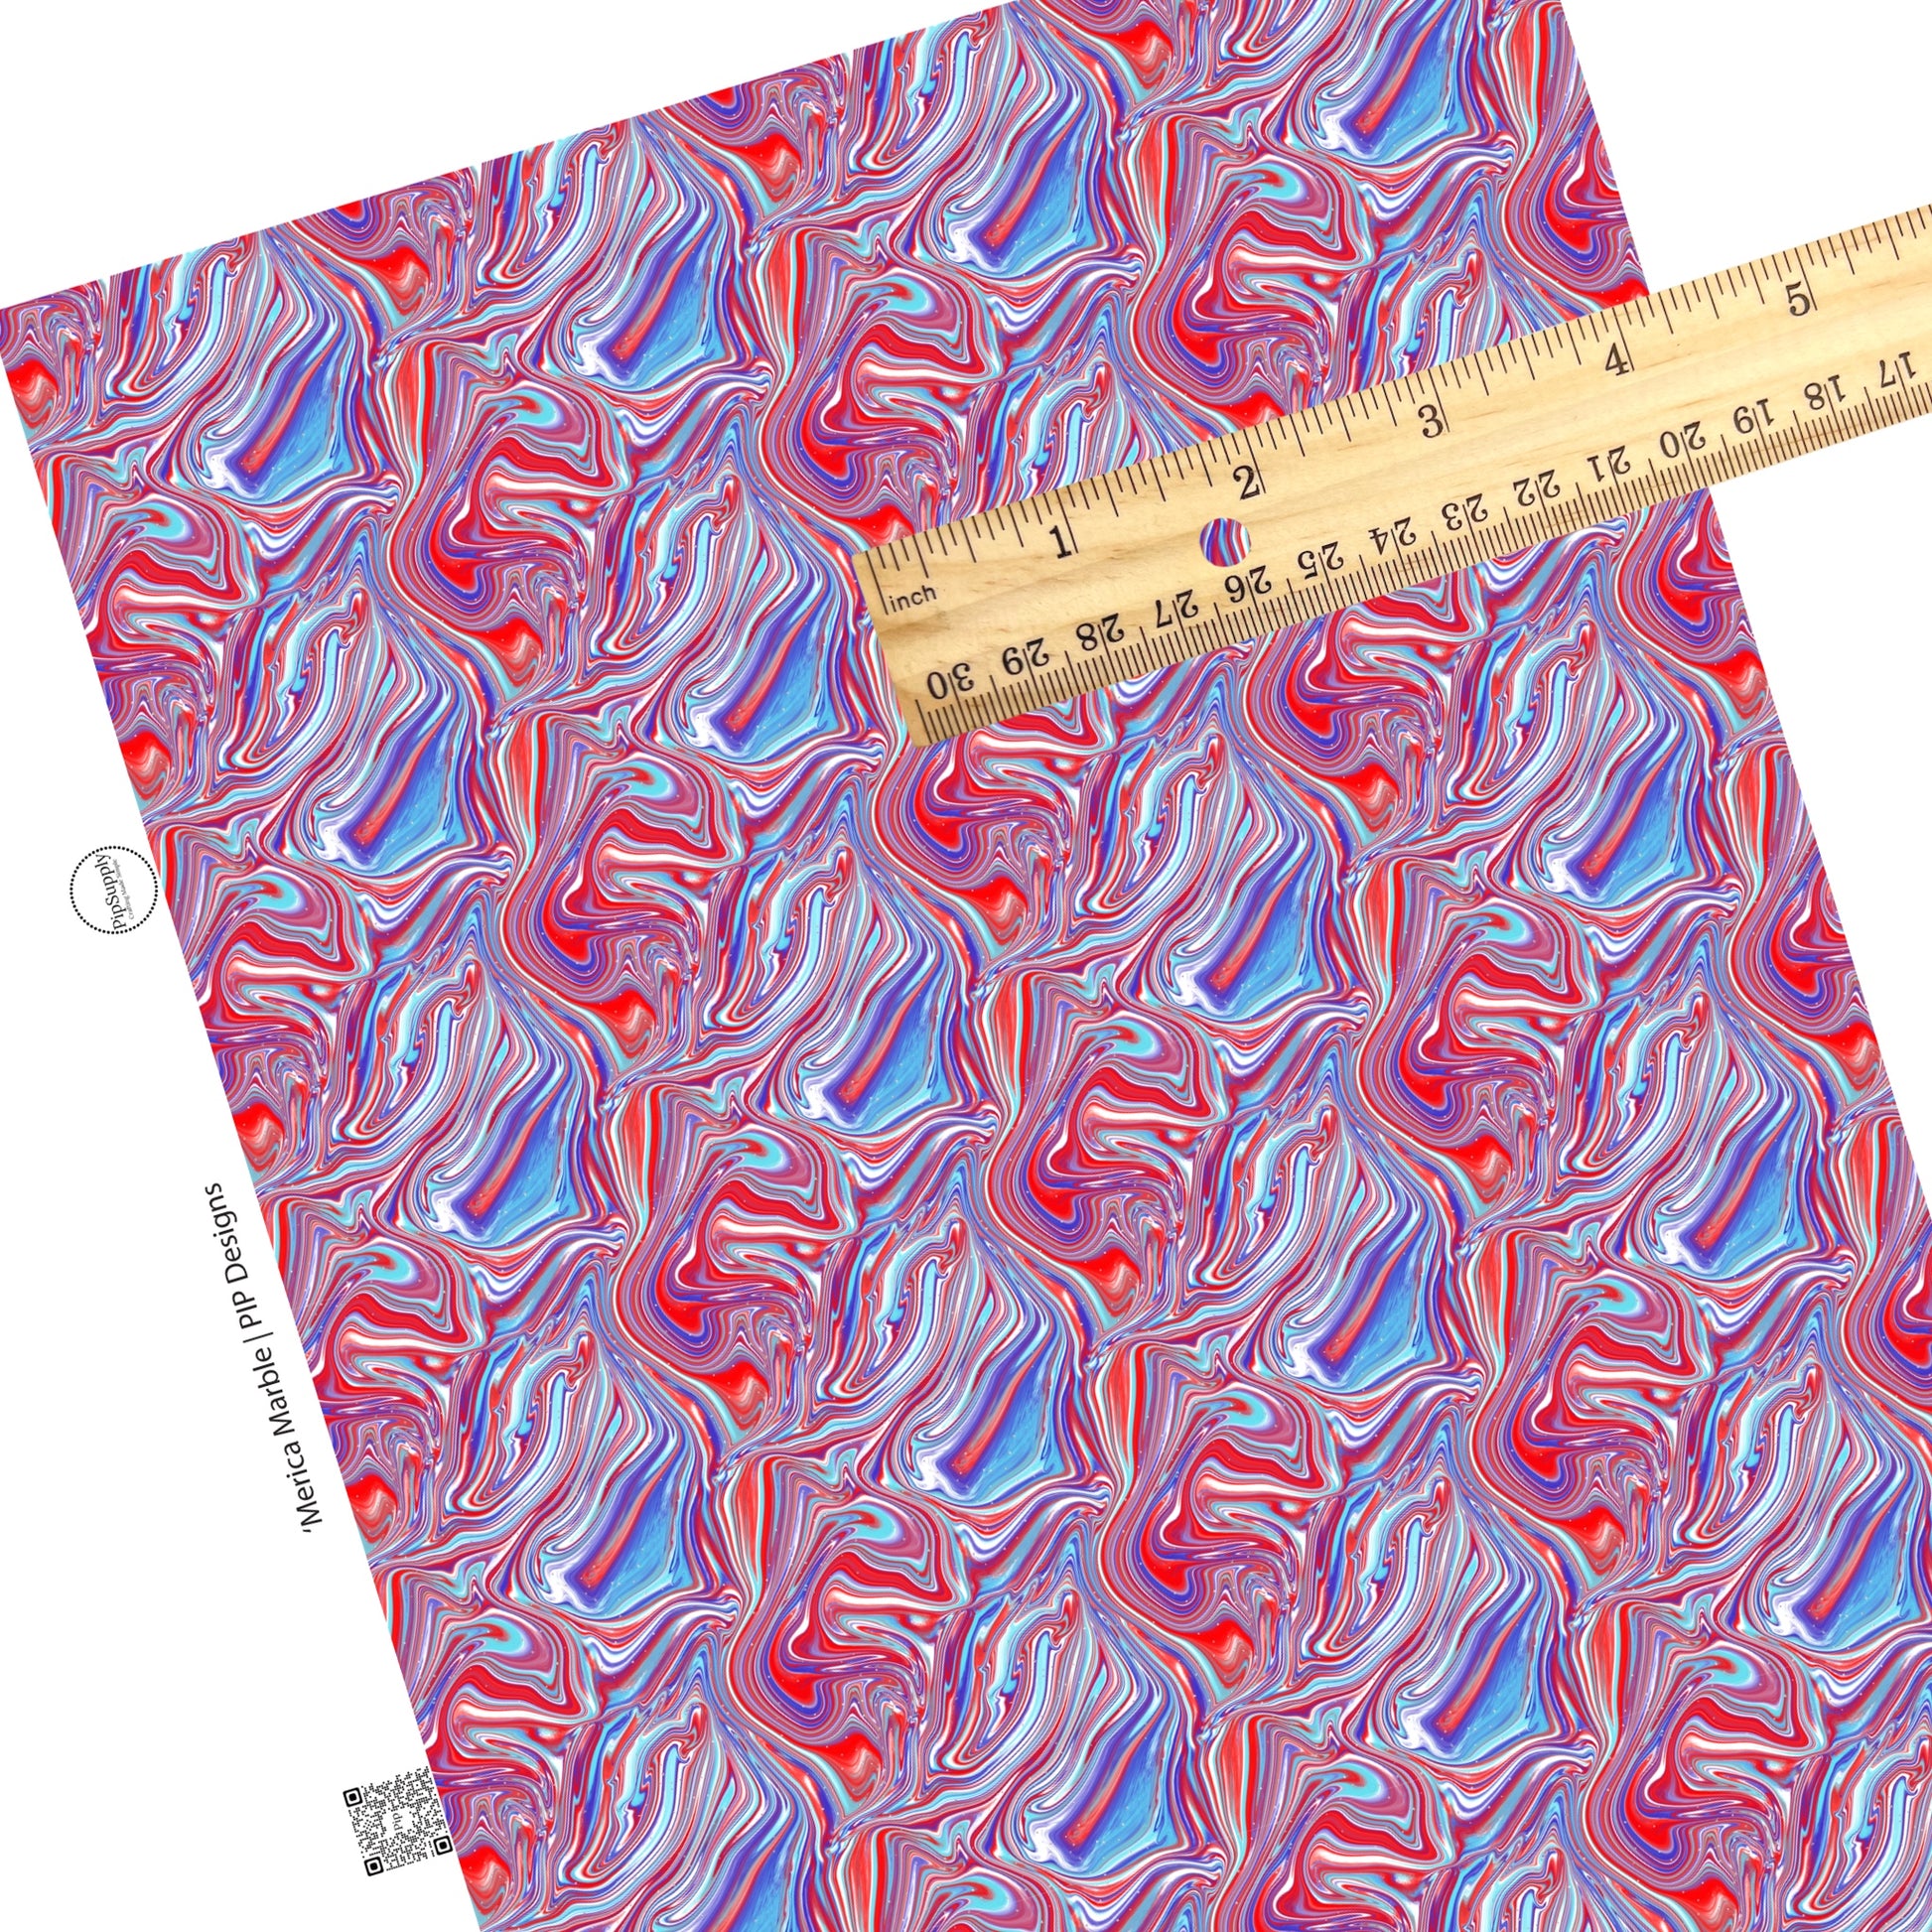 Swirly blue, white, and red marble faux leather sheets